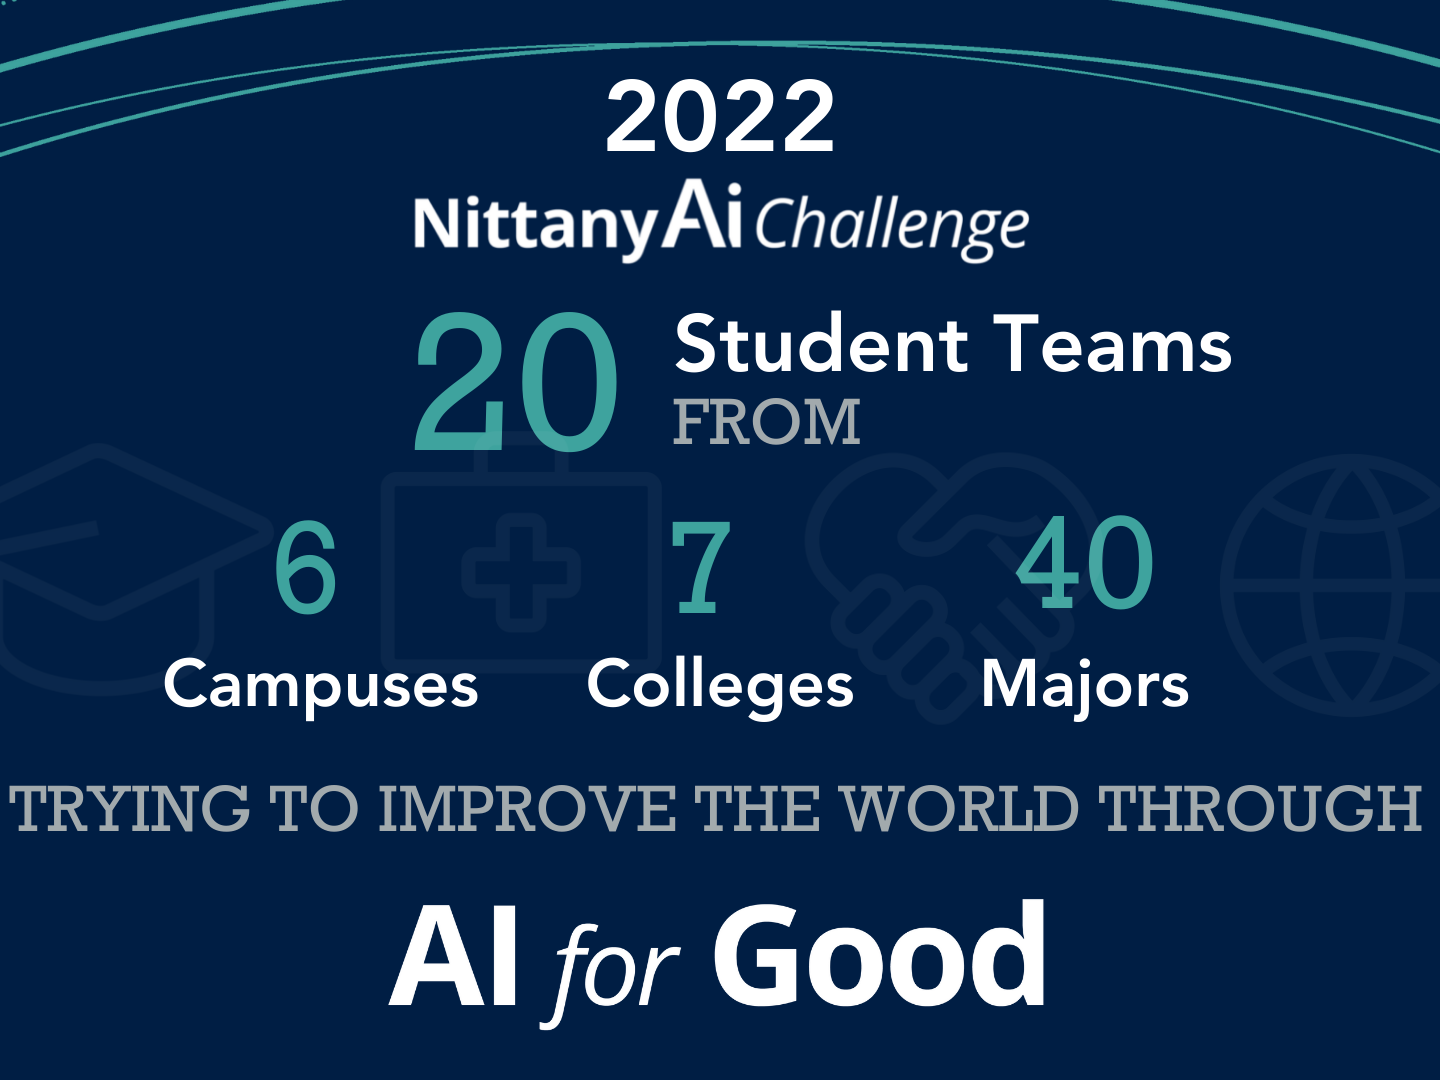 Twenty teams compete for $50,000 prize pool in the 2022 Nittany AI Challenge